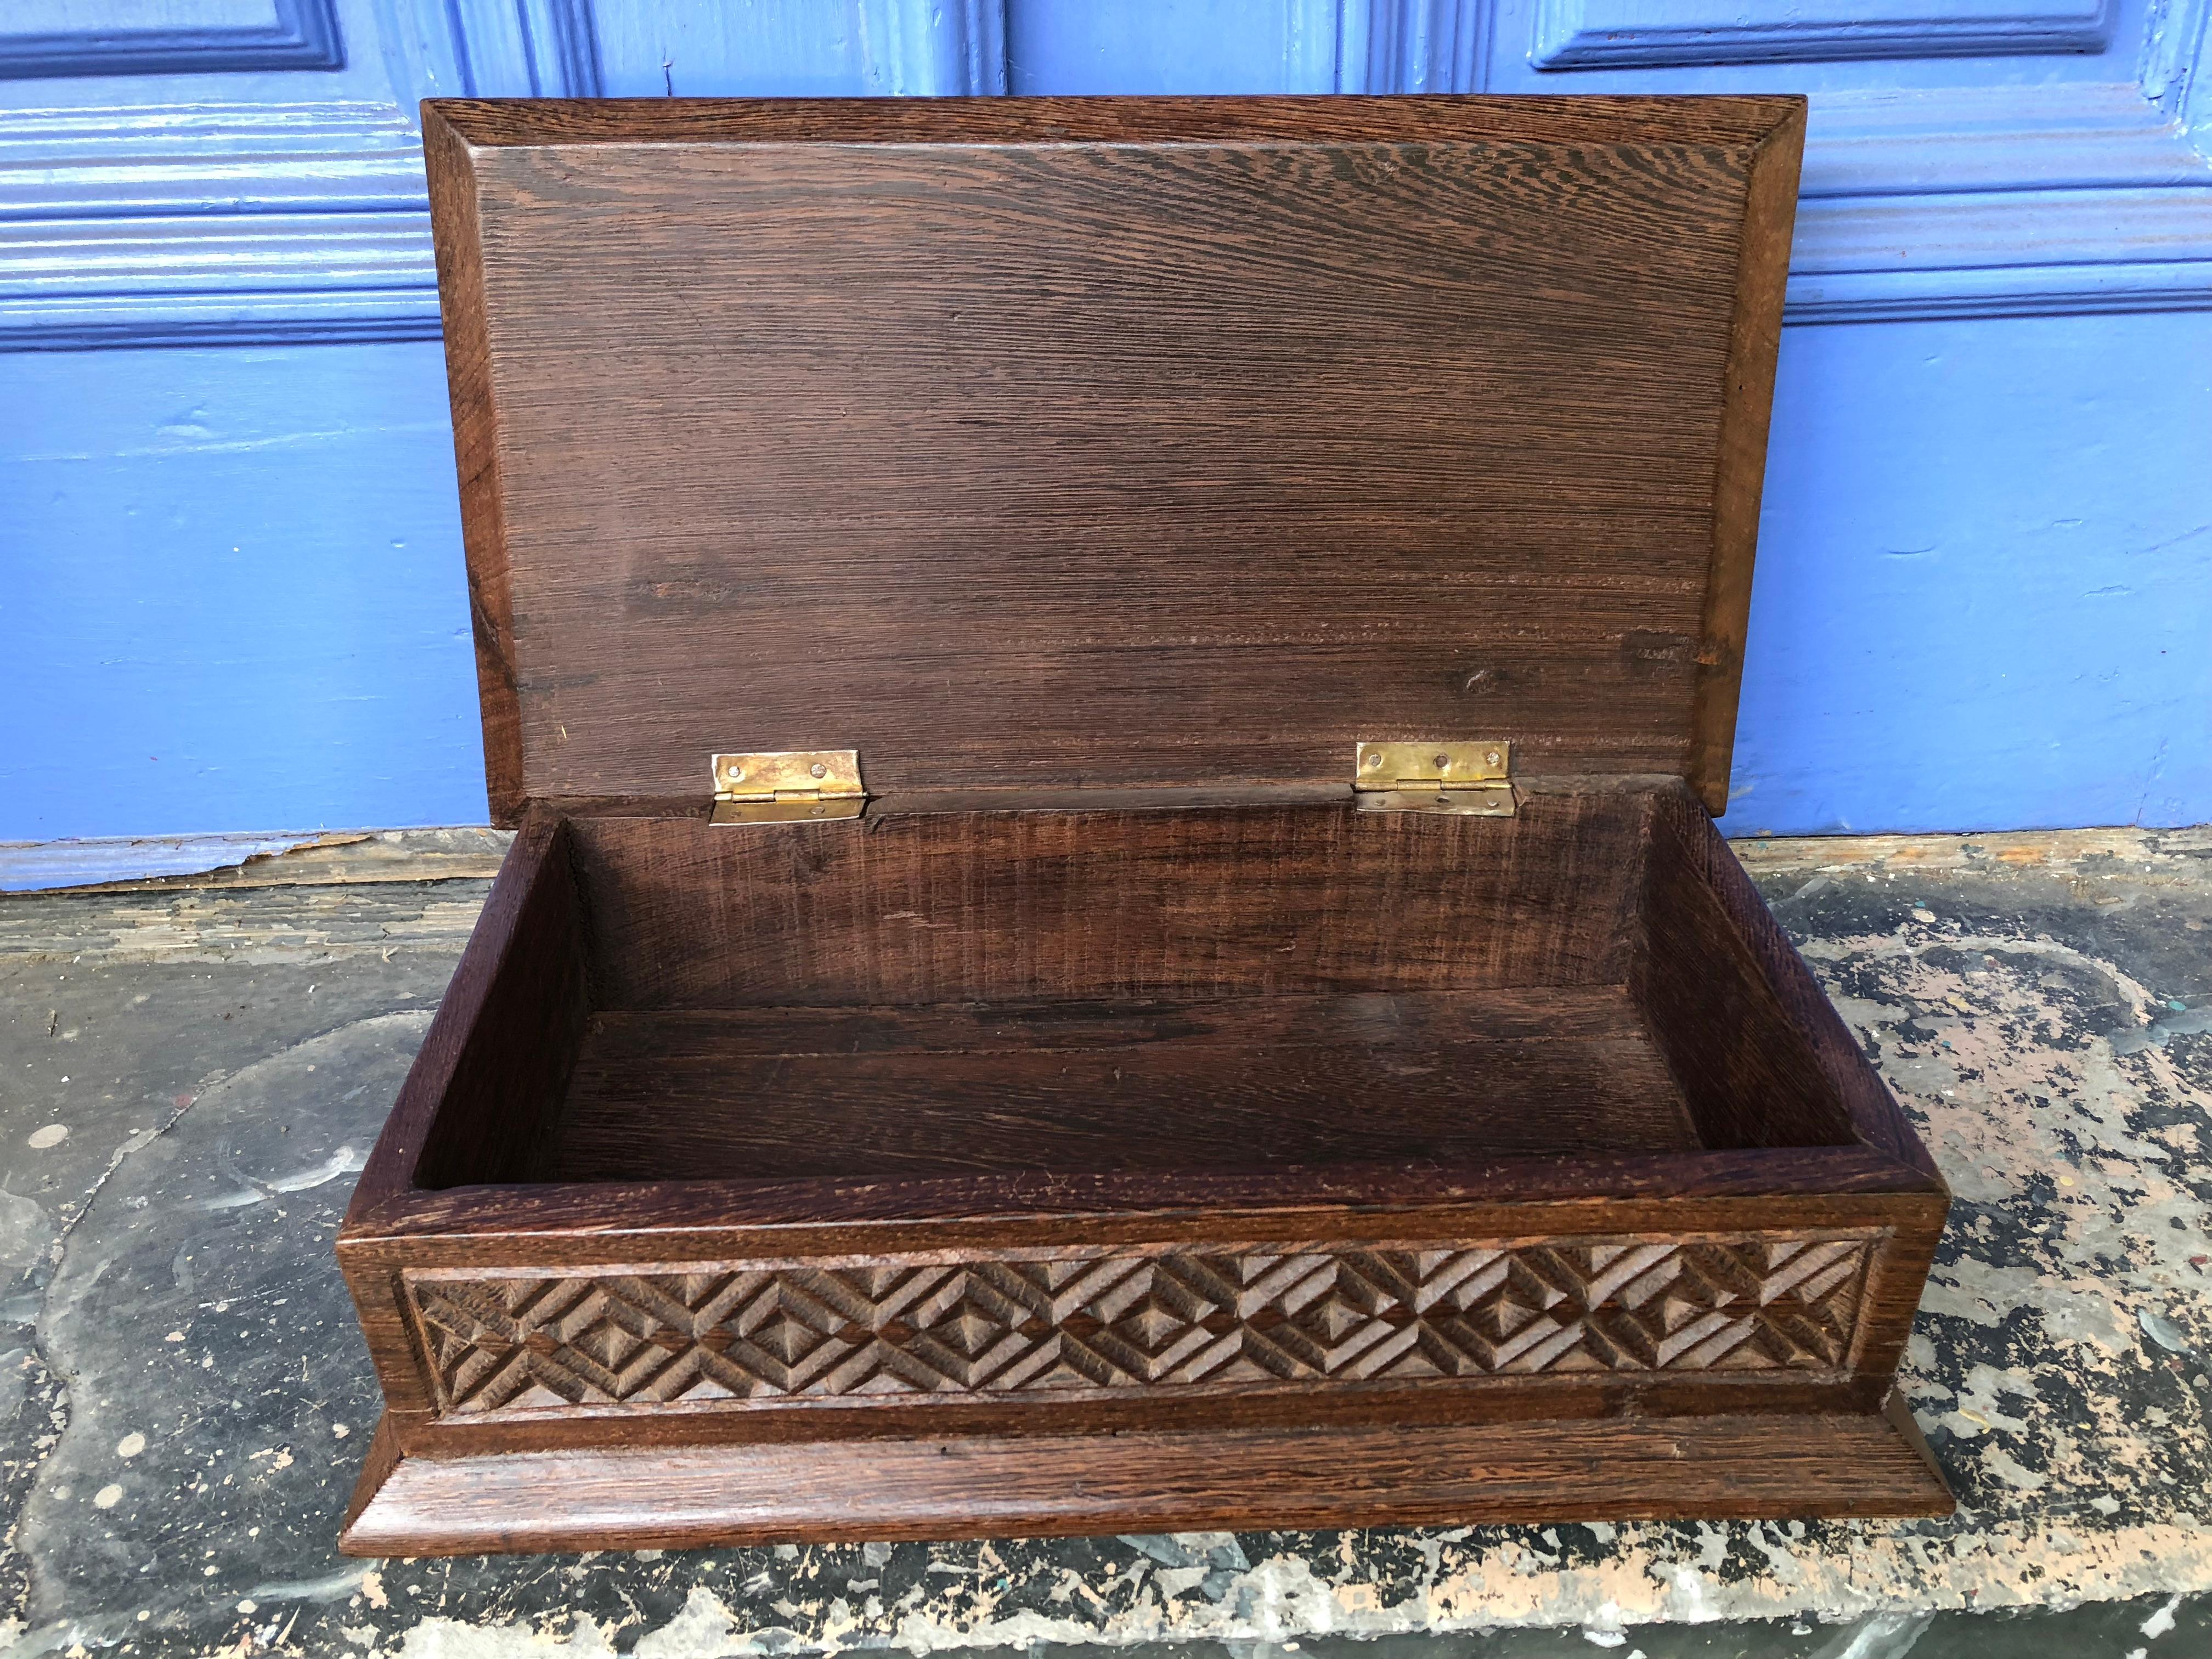 This old large stained oak box is a show stopper. The top and sides are carved with a repeating geometric pattern. It is very solid. Hinges work well. It's only flaw is a split in the wood on the bottom which shows age but has not affected its